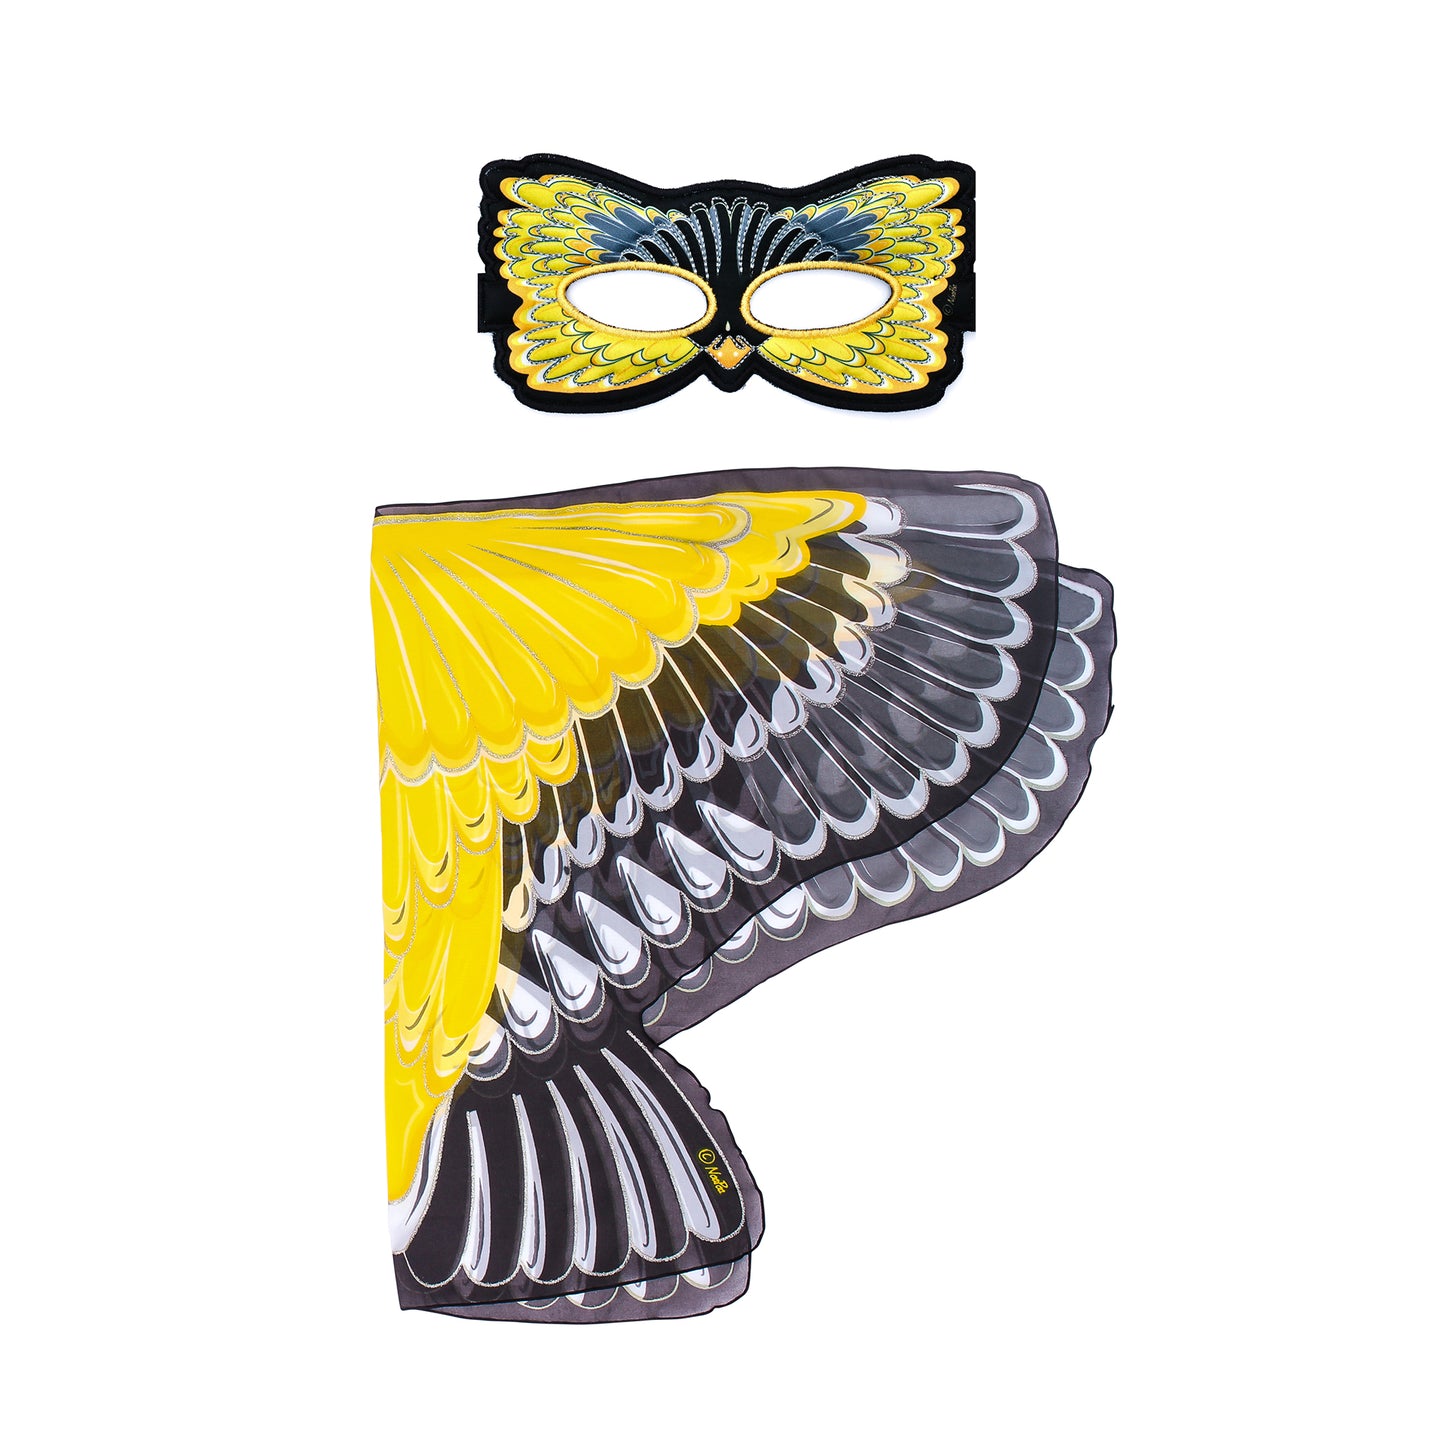 AMERICAN BIRD WINGS + MASK in eco-friendly cotton gift bag